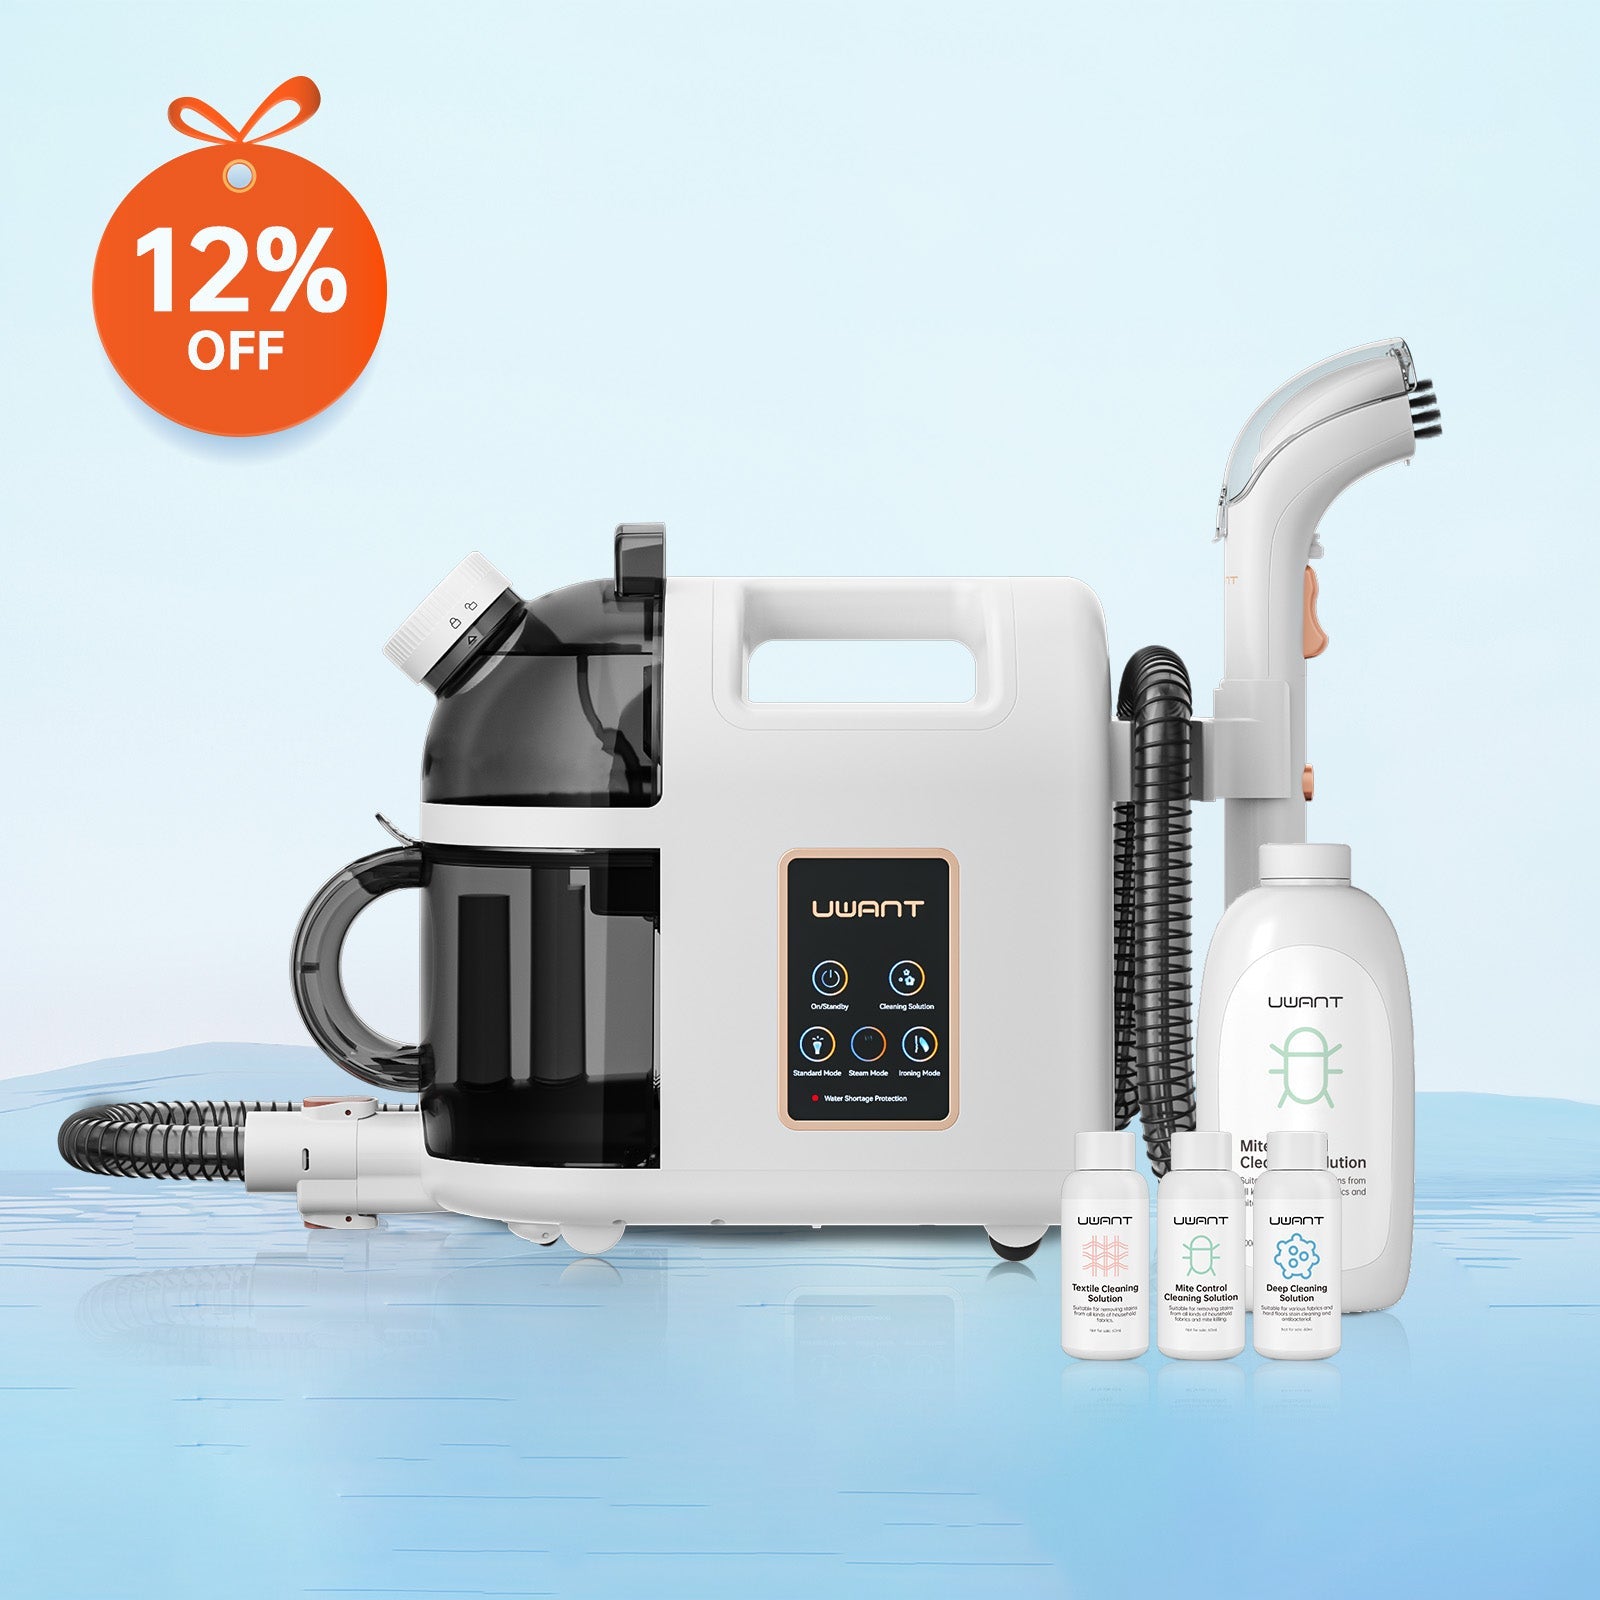 UWANT EuropeUWANT B200 12% 0FF SET (With Cleaning Solution)